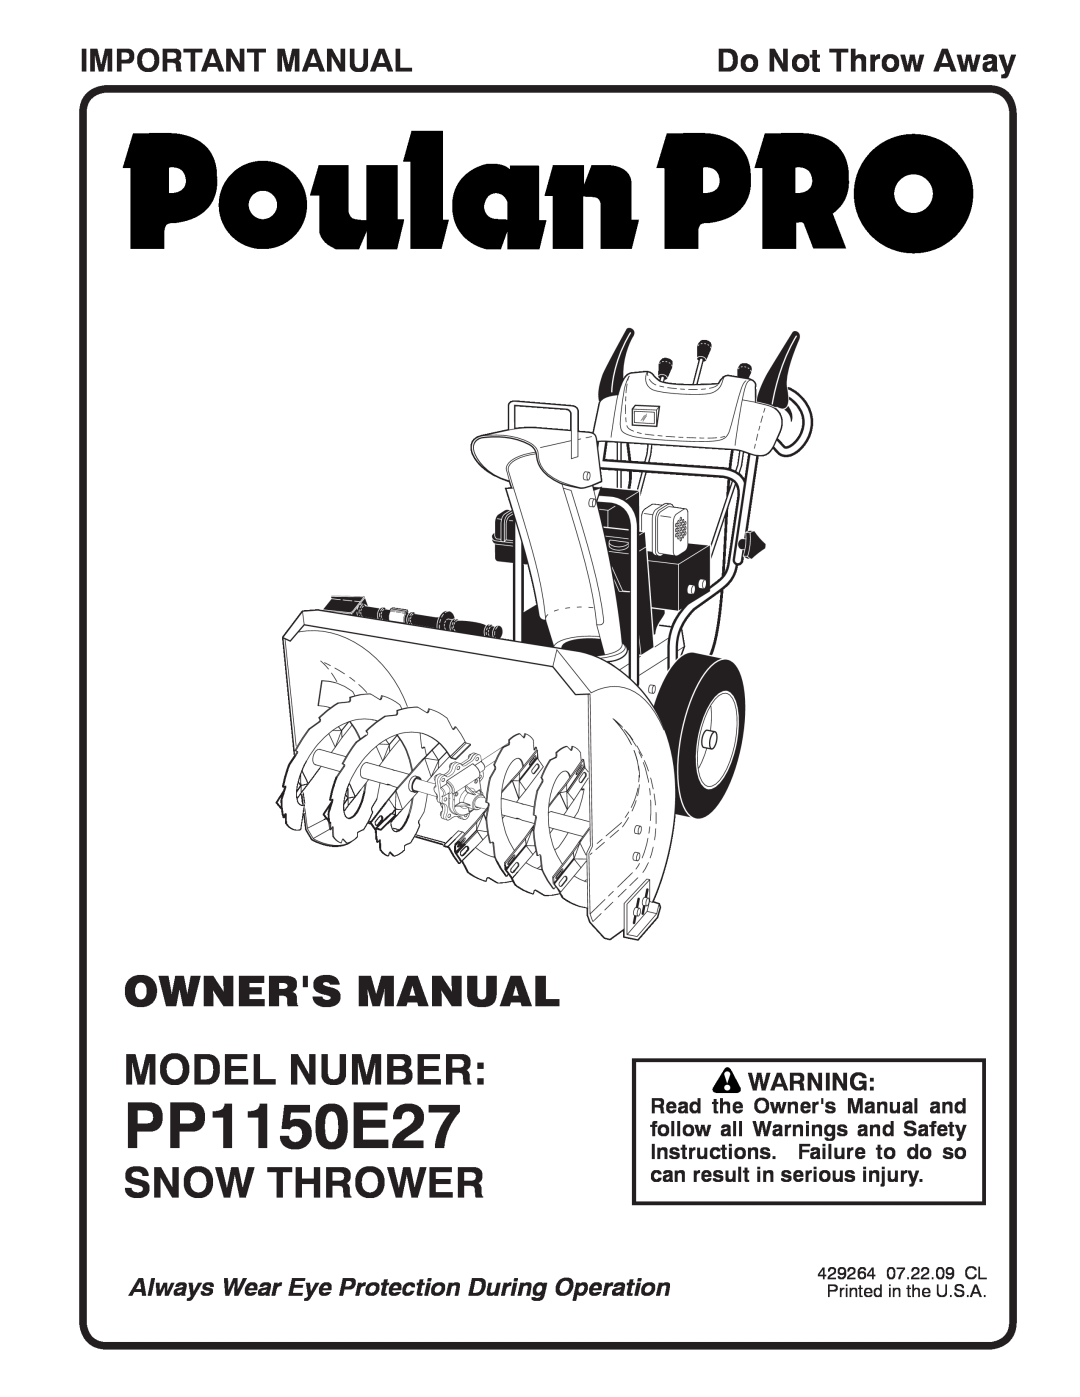 Poulan 96198003301, 429264 owner manual Snow Thrower, Important Manual, PP1150E27, Do Not Throw Away 